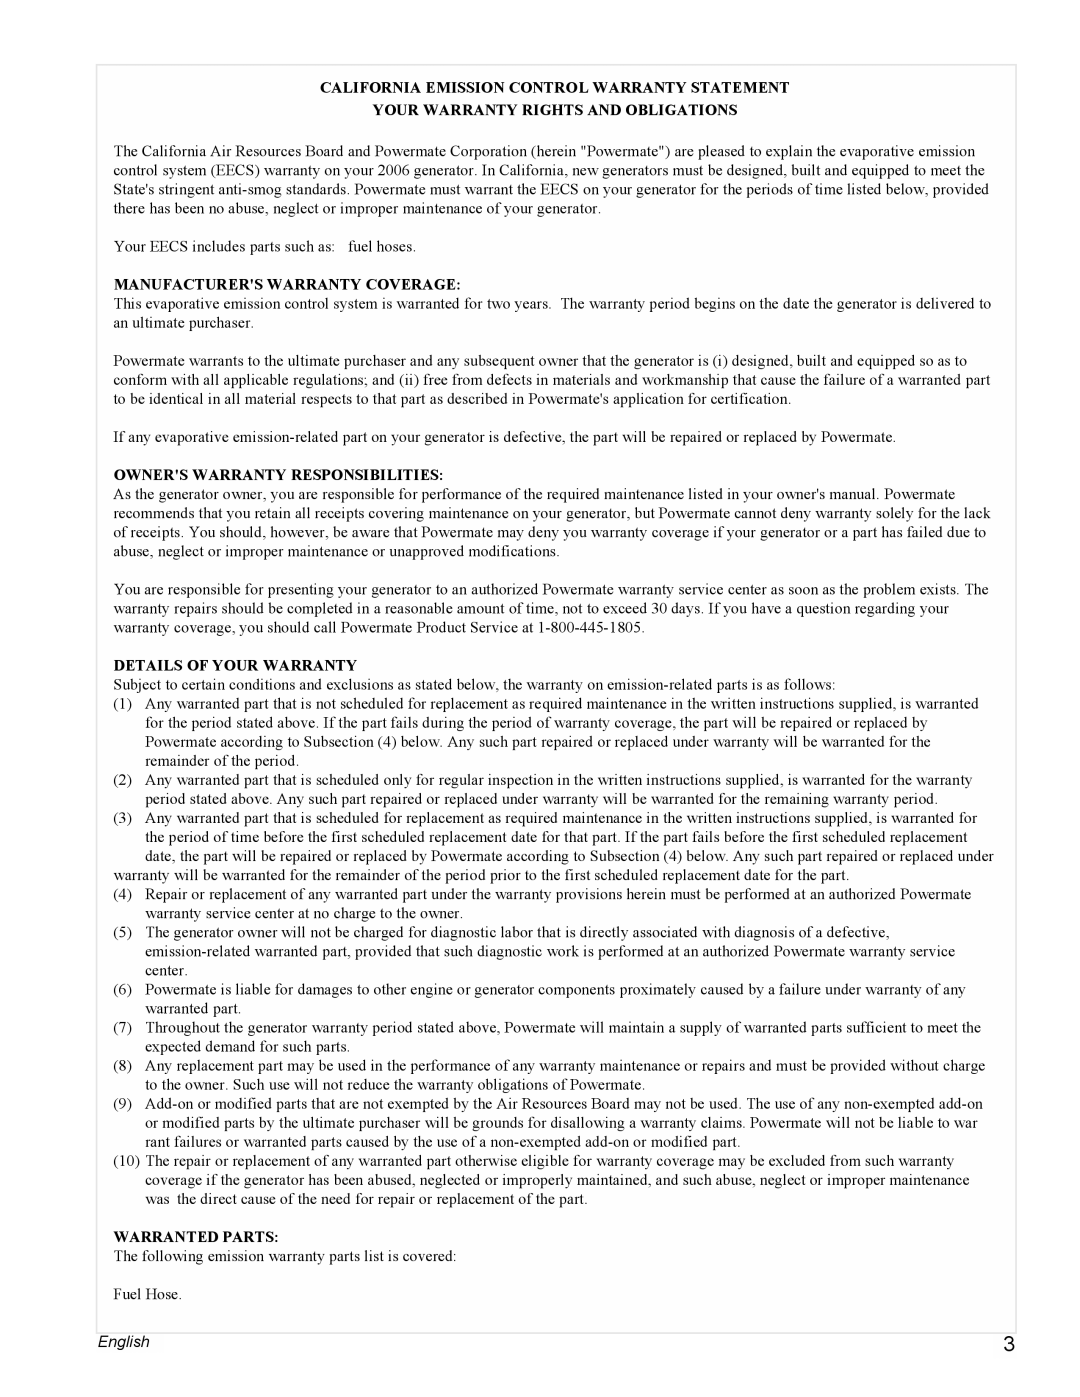 Powermate PMC603250 California Emission Control Warranty Statement, Your Warranty Rights And Obligations, Warranted Parts 